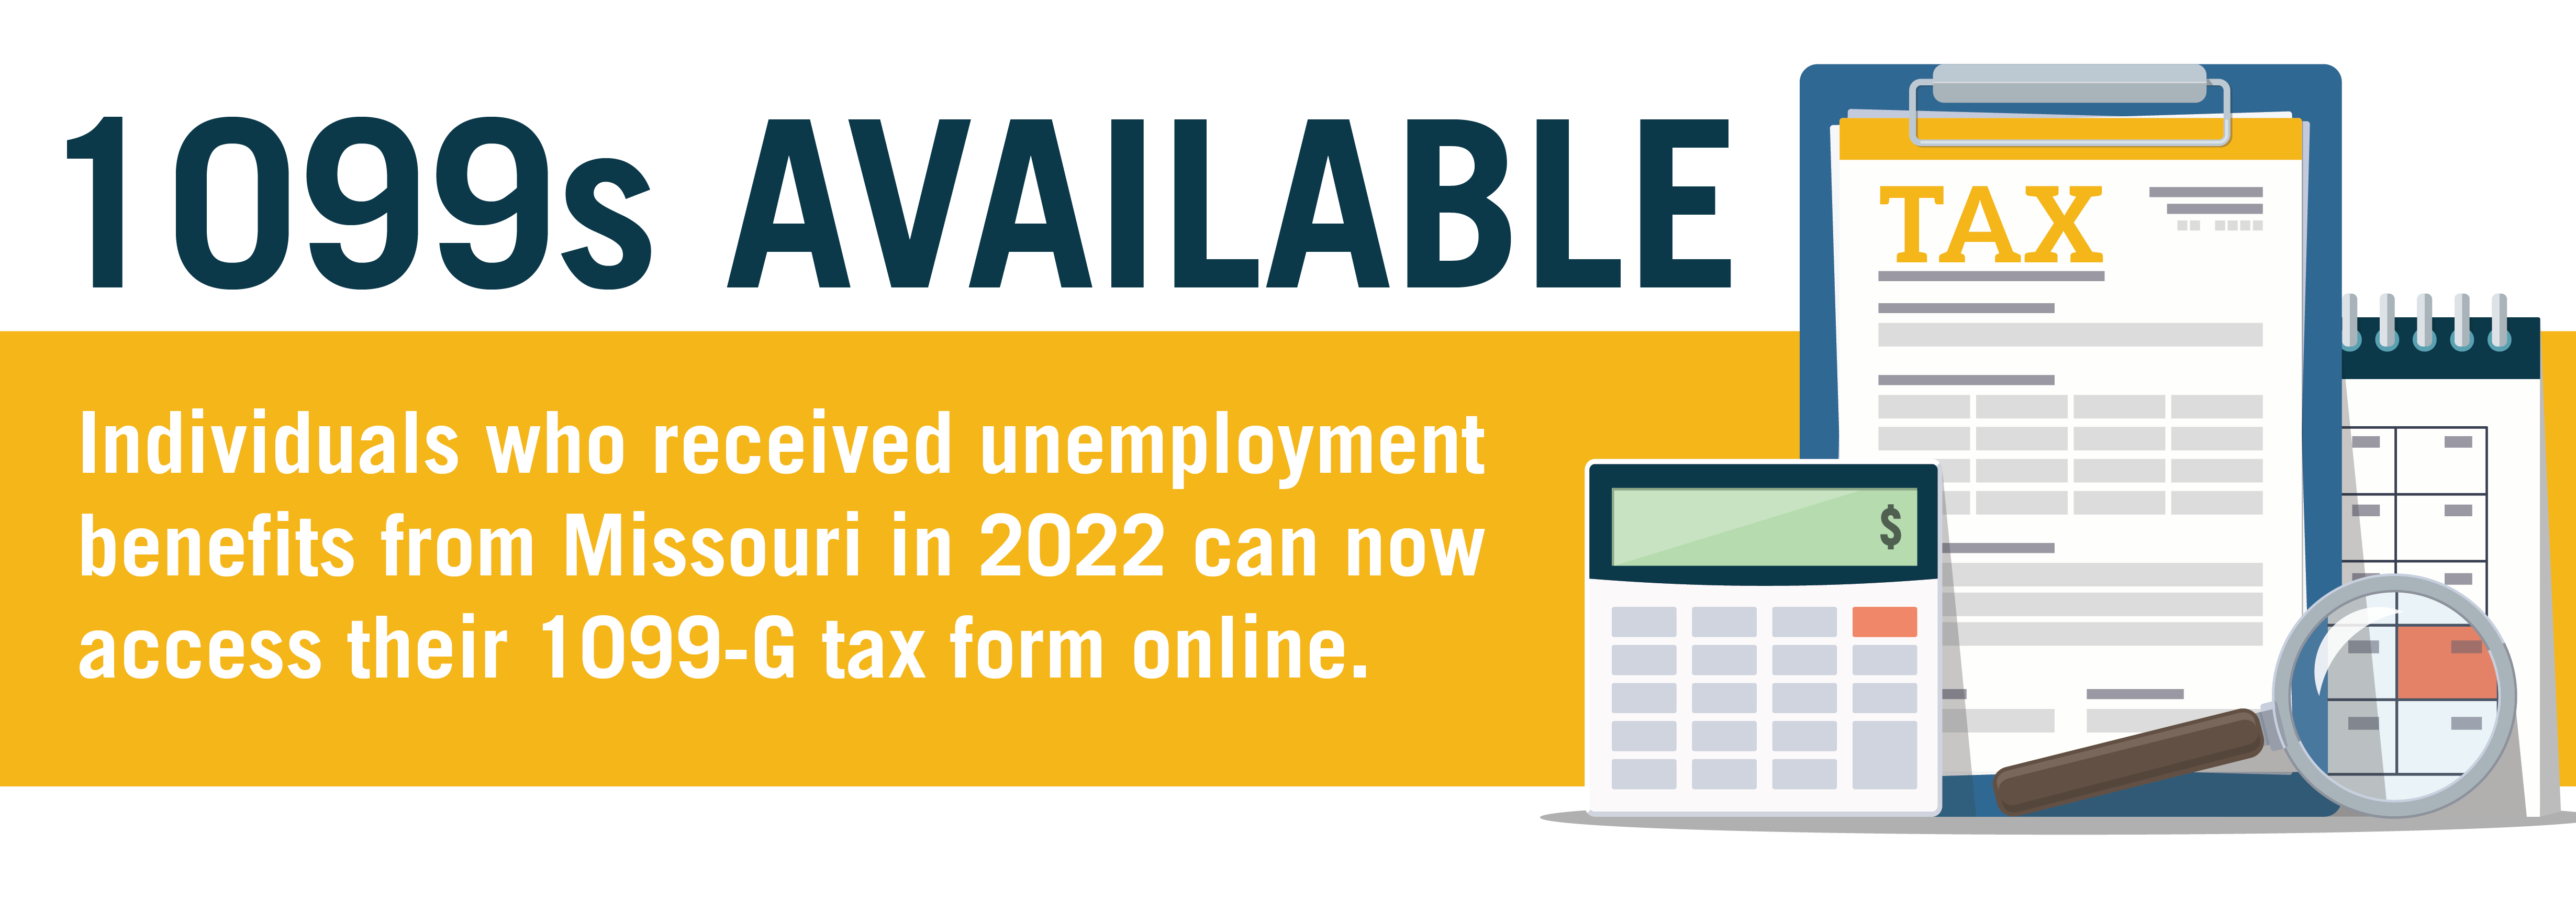 1099s available — Individuals who received unemployment benefits from Missouri in 2022 can now access their 1099-G tax form online